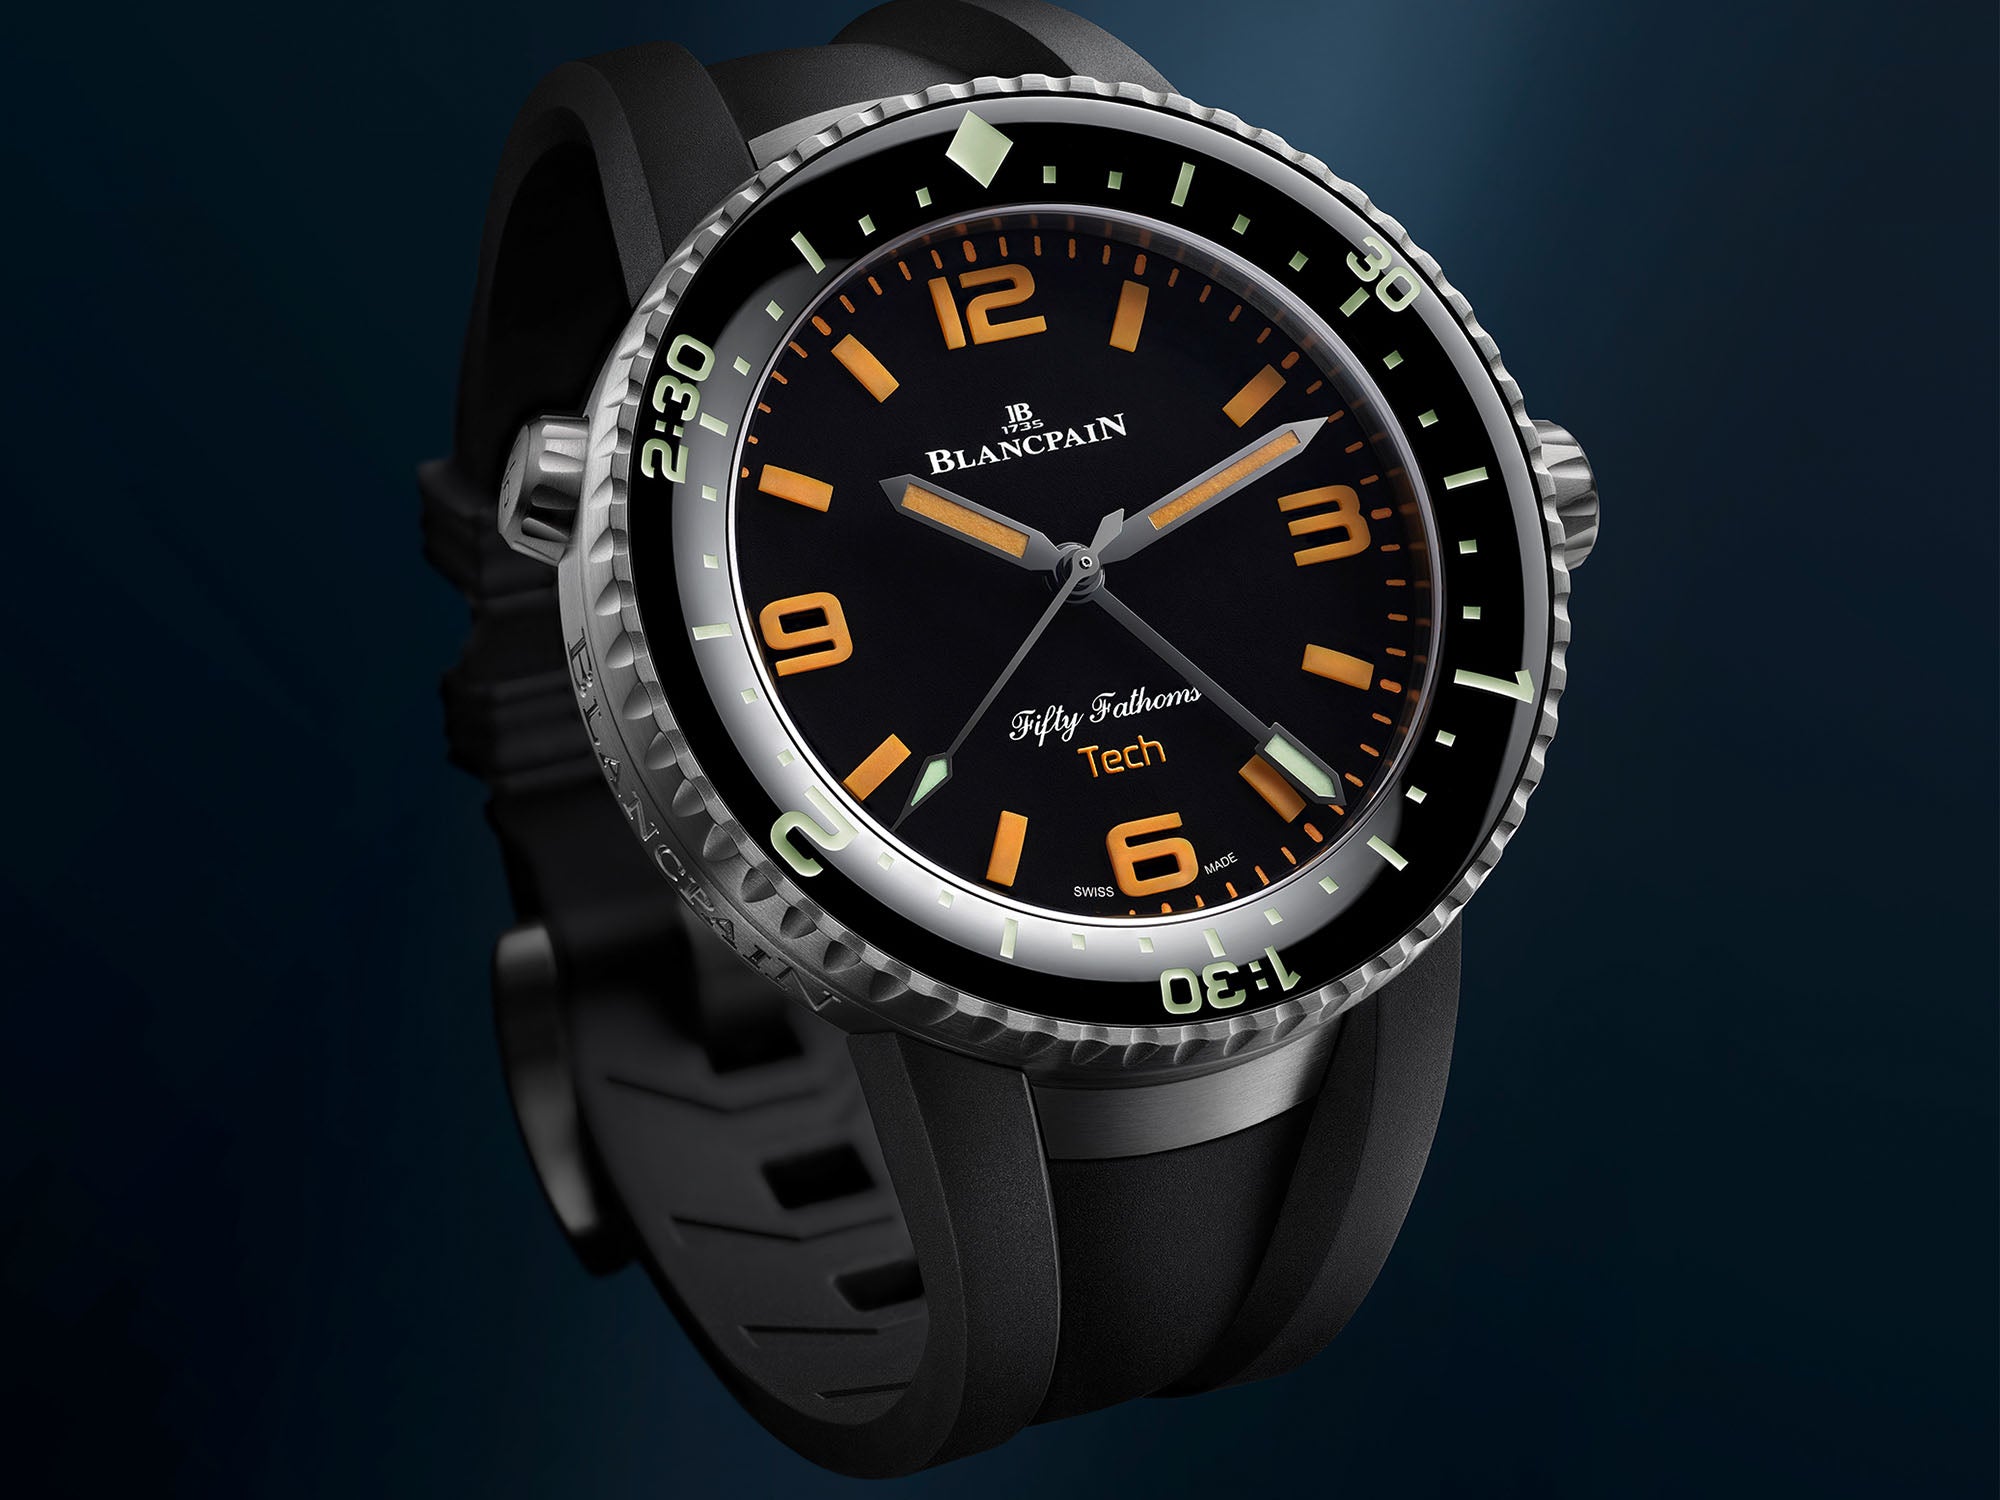 44 MM MILITARY DIVER 300 AUTOMATIC - SS CERAMIC BEZEL LUME WAVE DIAL STRAP  - MIL DIVER AUTOMATIC 44MM WATCH